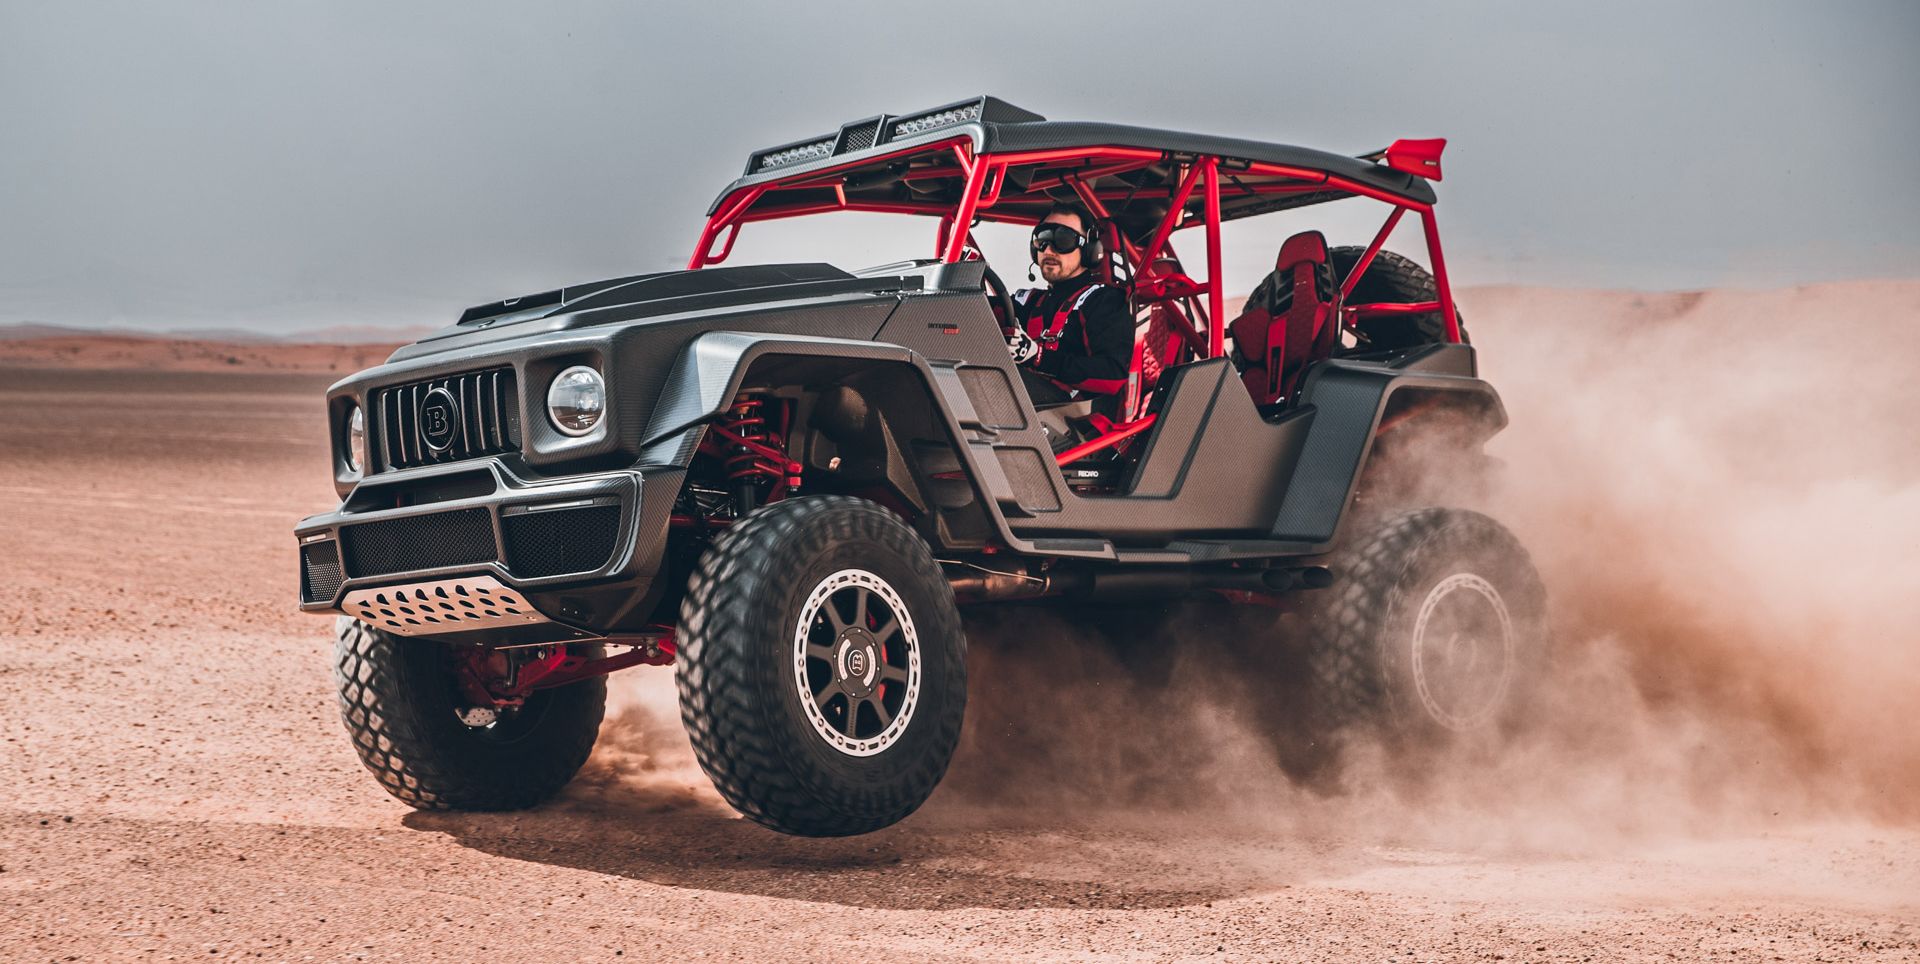 The Brabus 900 Crawler Is a 900-HP Dune Buggy for the Unhinged